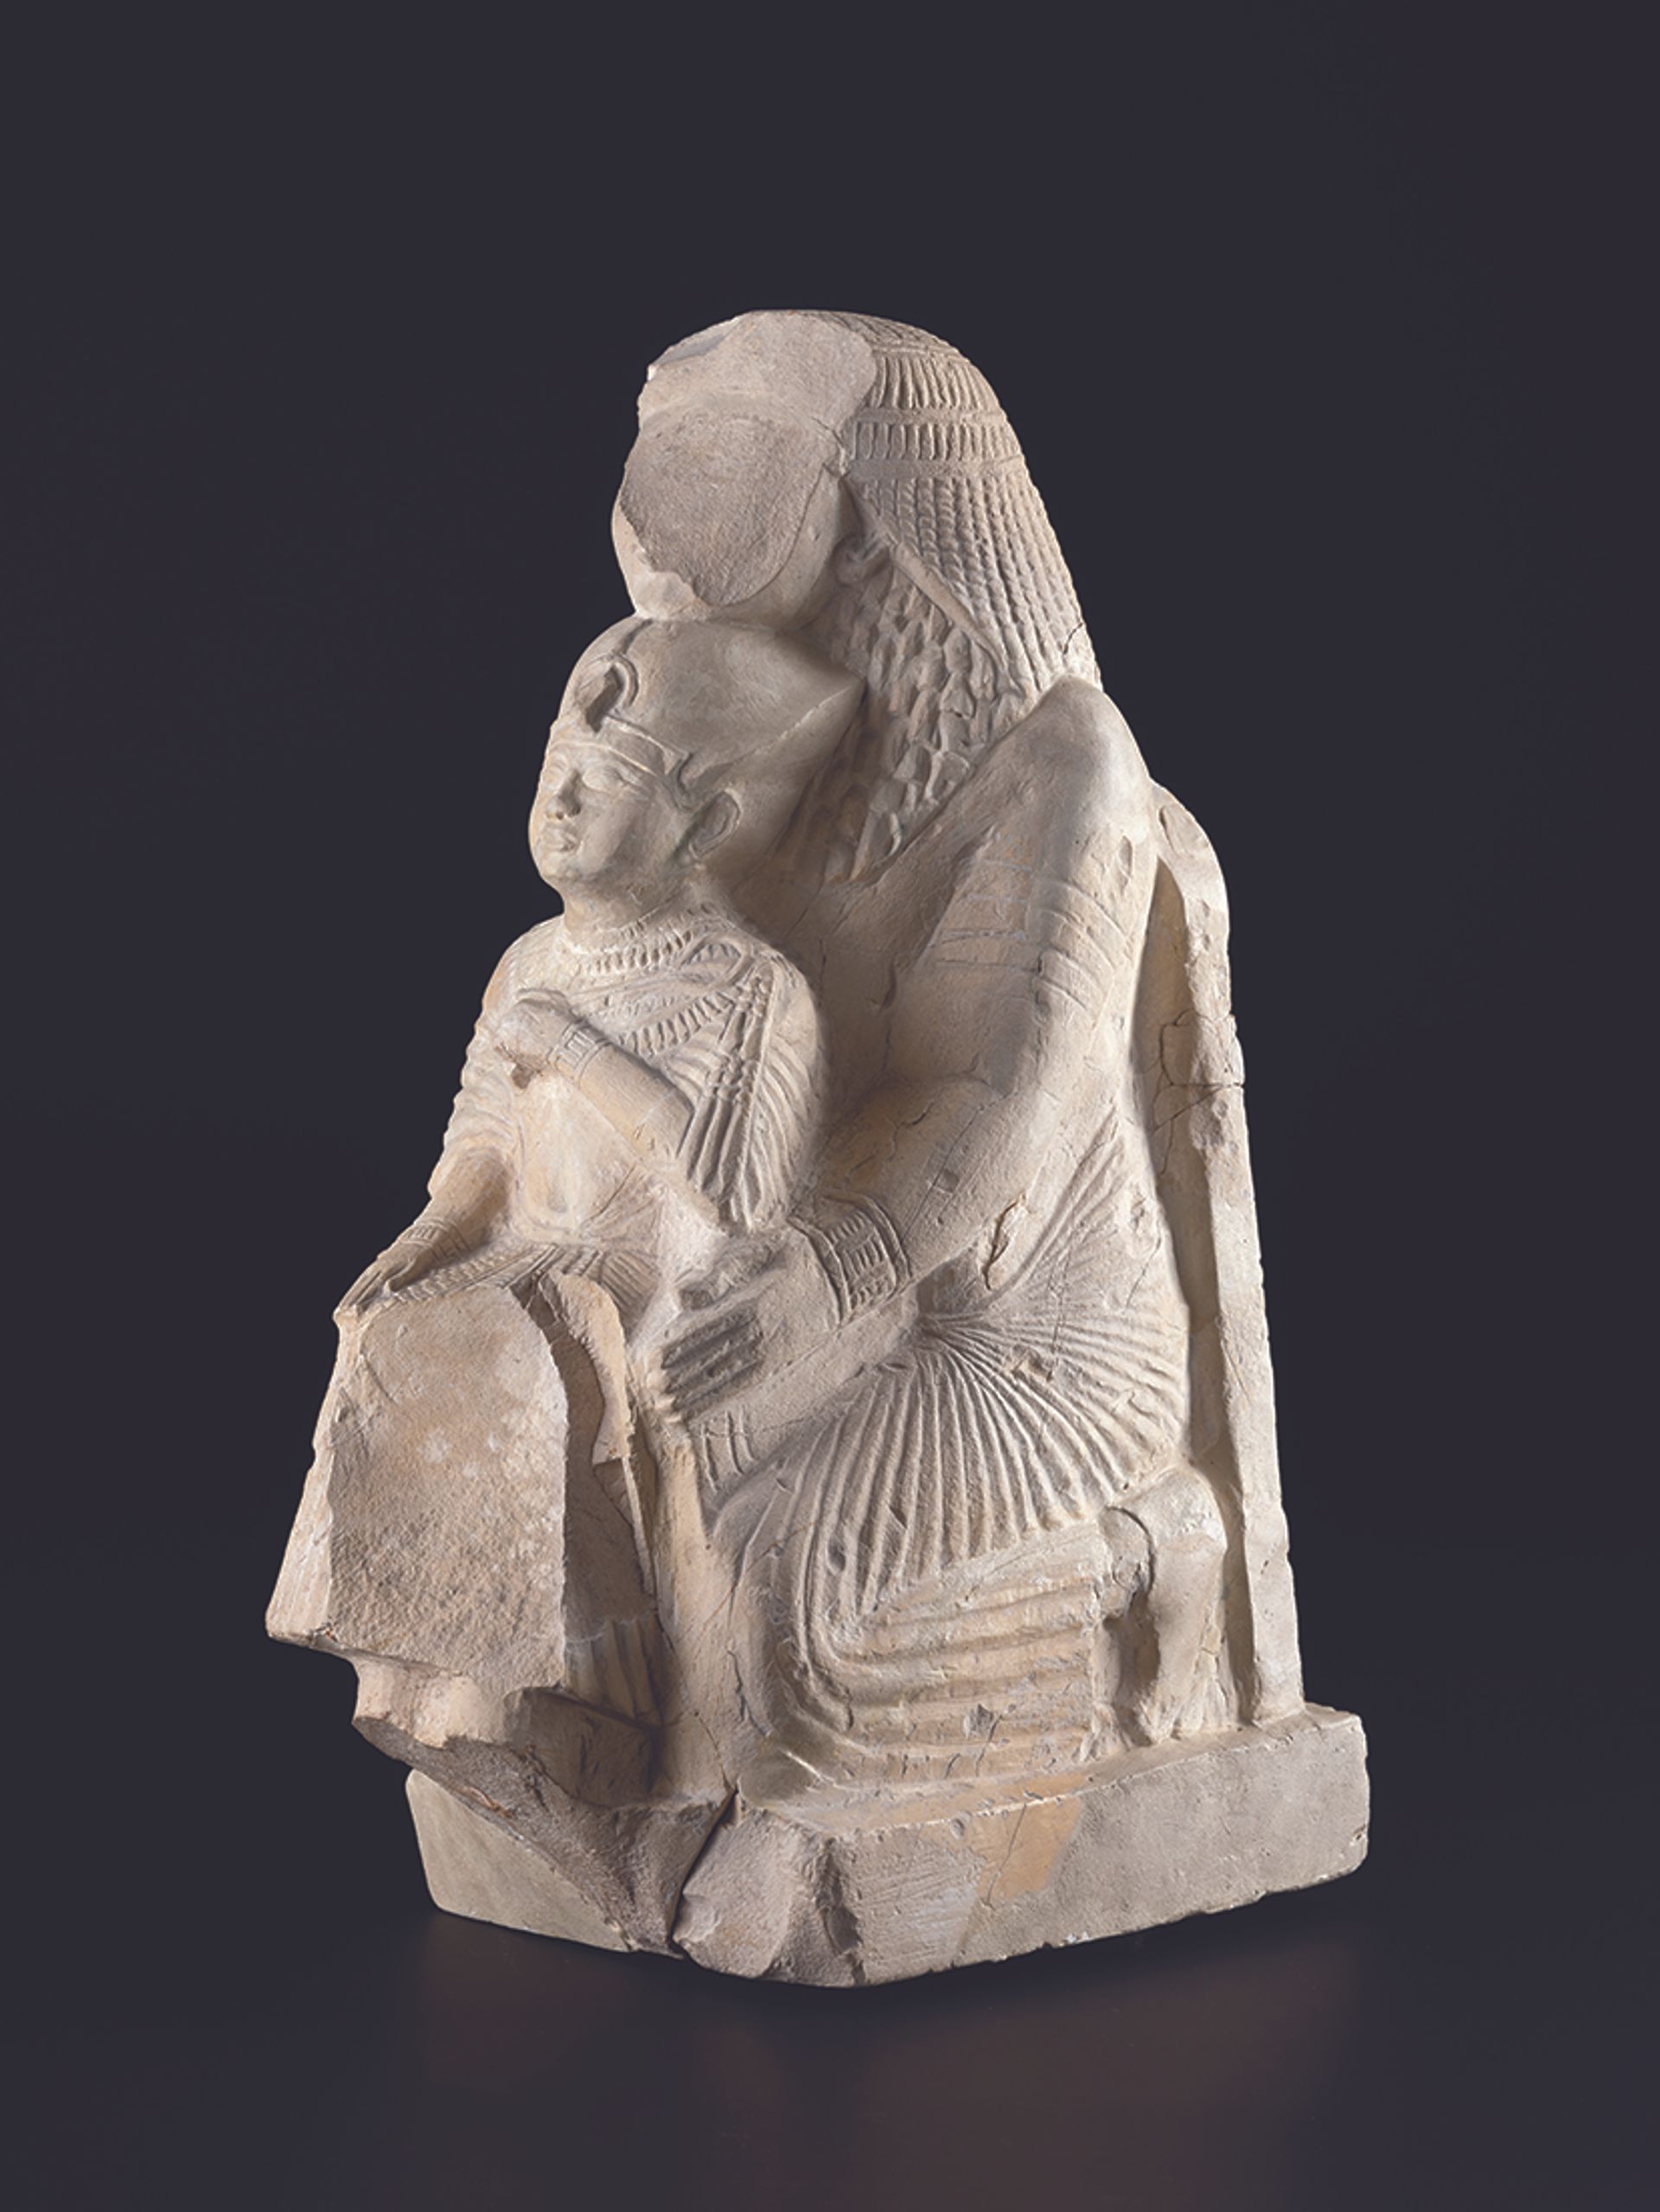 The ancient sculpture is held at the National Museum of              Scotland in Edinburgh after being excavated by archaeologist              Alexander Henry Rhind, who died in 1863, aged just 29, on a              return voyage from Egypt, of tuberculosis              Photo: Courtesy National Museums Scotland